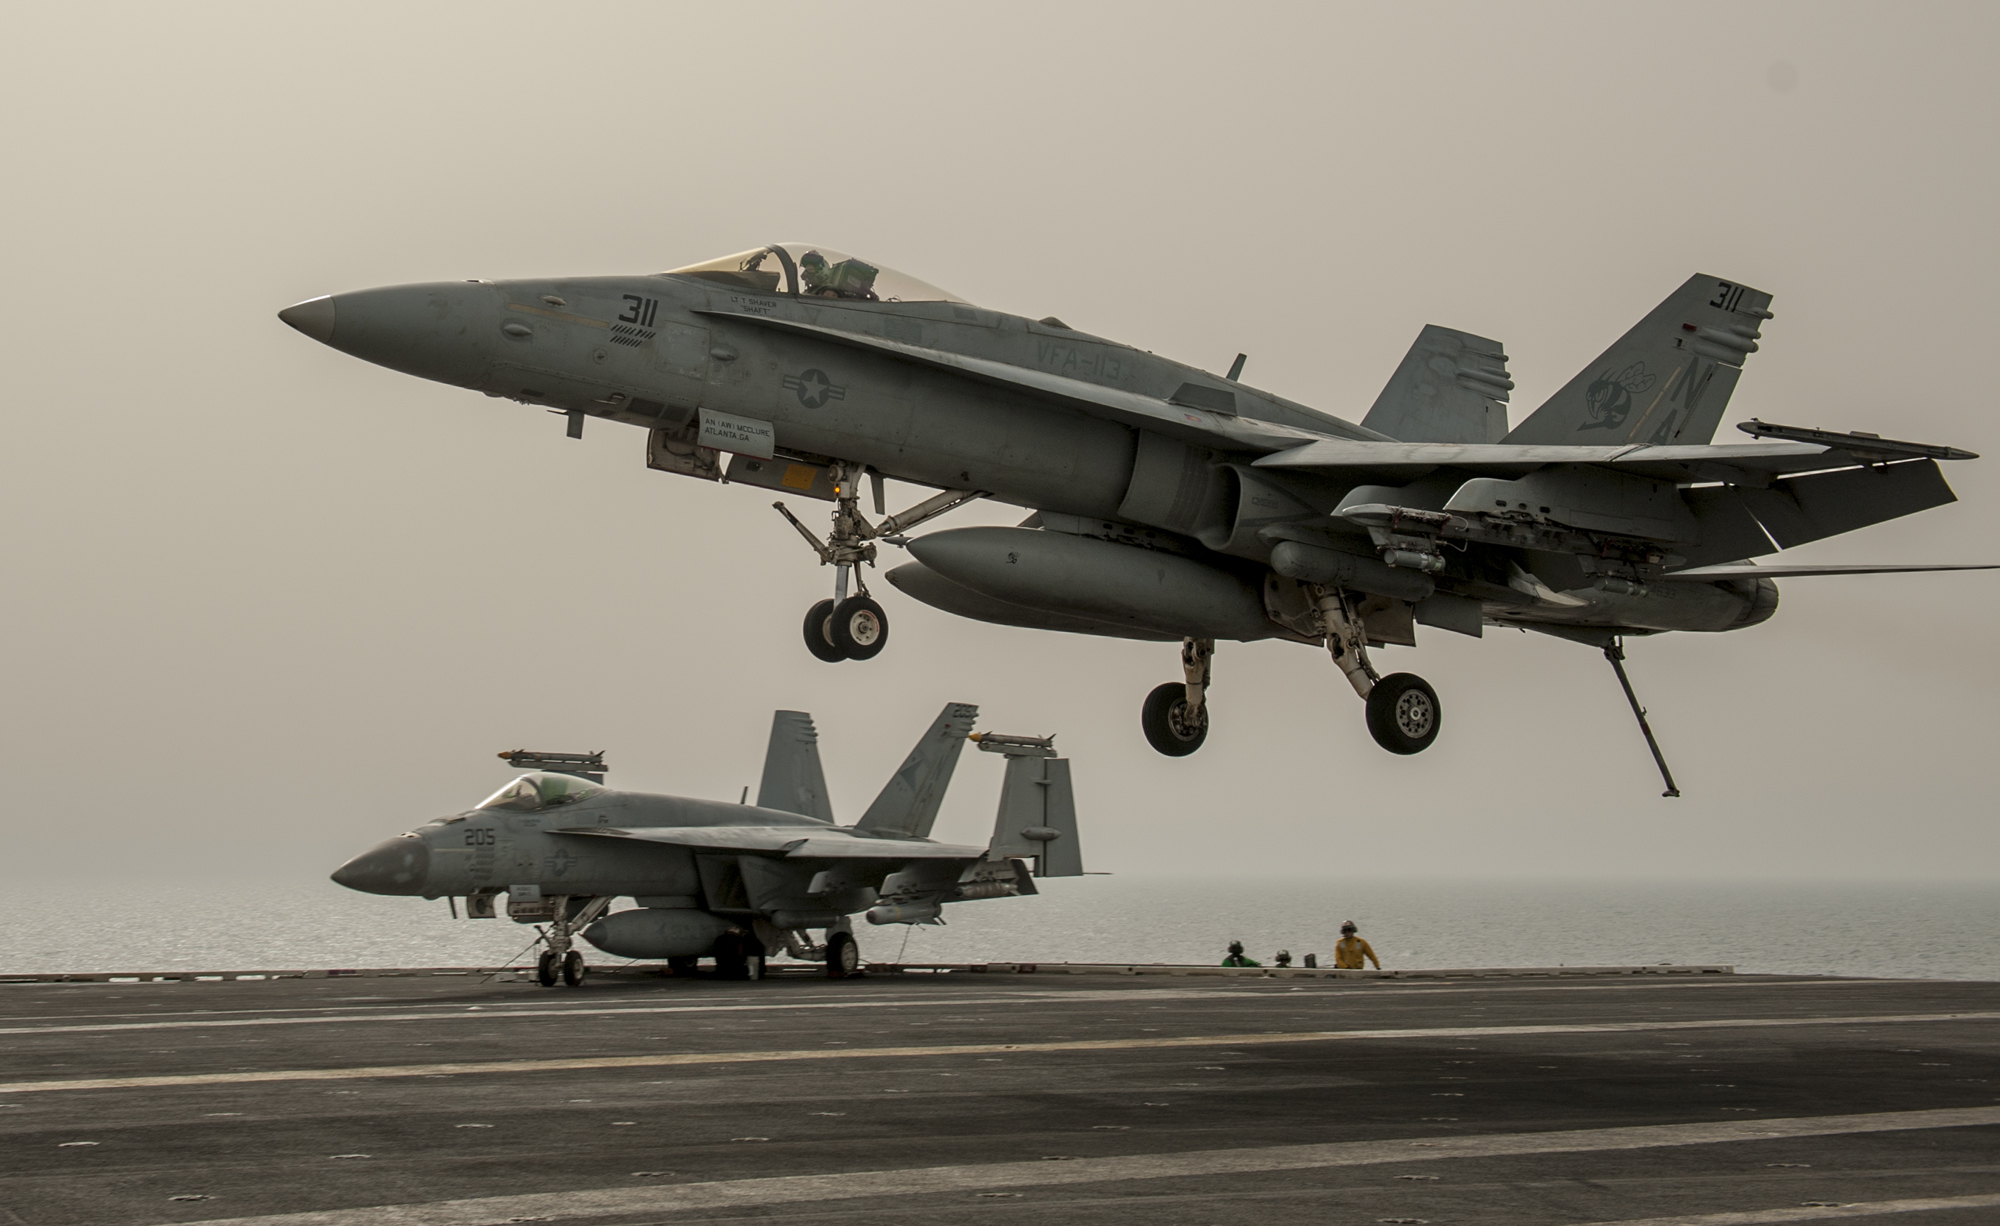 An F/A-18C Hornet attached to the Stingers of Strike Fighter Squadron (VFA) 113 makes an arrested recovery during the final flight operations in support of Operation Inherent Resolve aboard the aircraft carrier USS Carl Vinson (CVN 70) on April 11, 2015. US Navy photo.